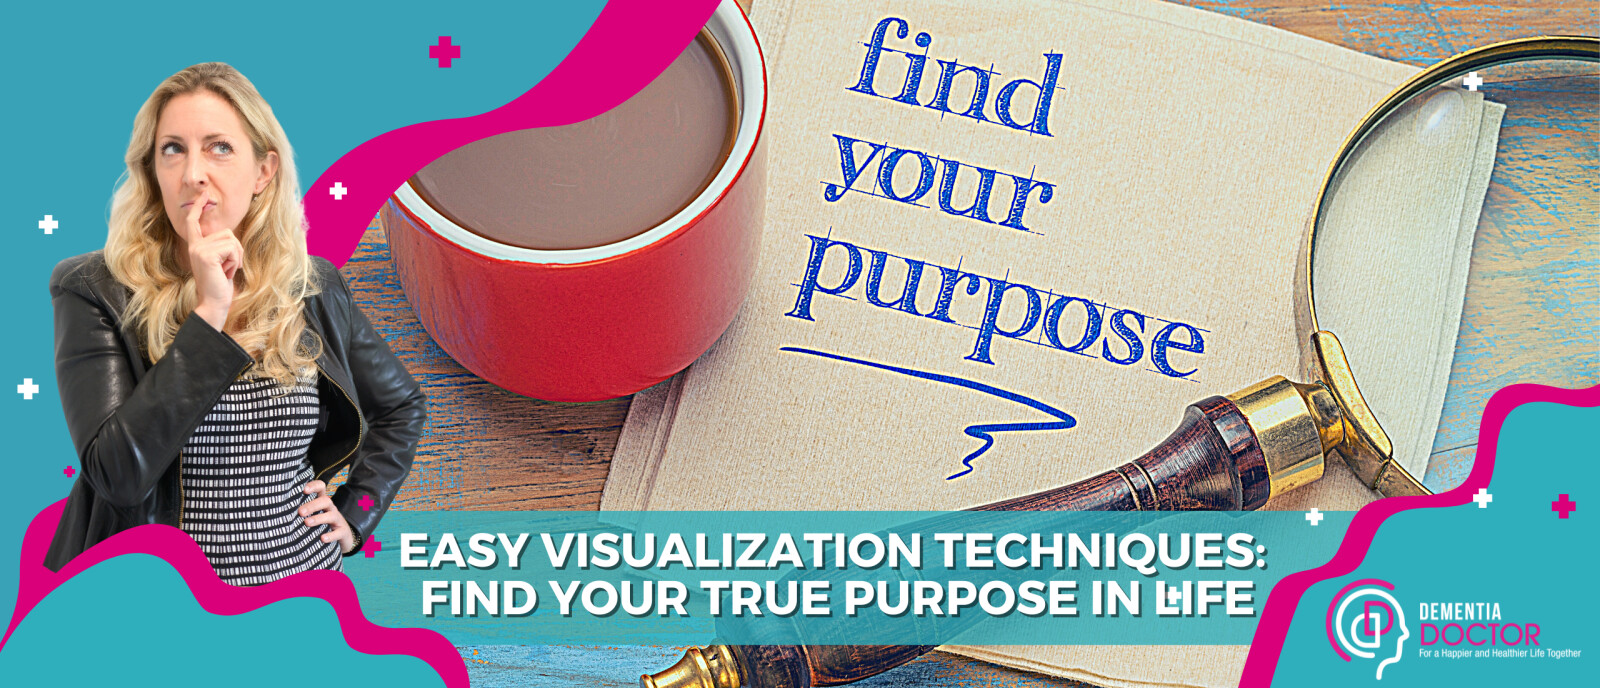 Easy visualization techniques to help you find your true purpose in life